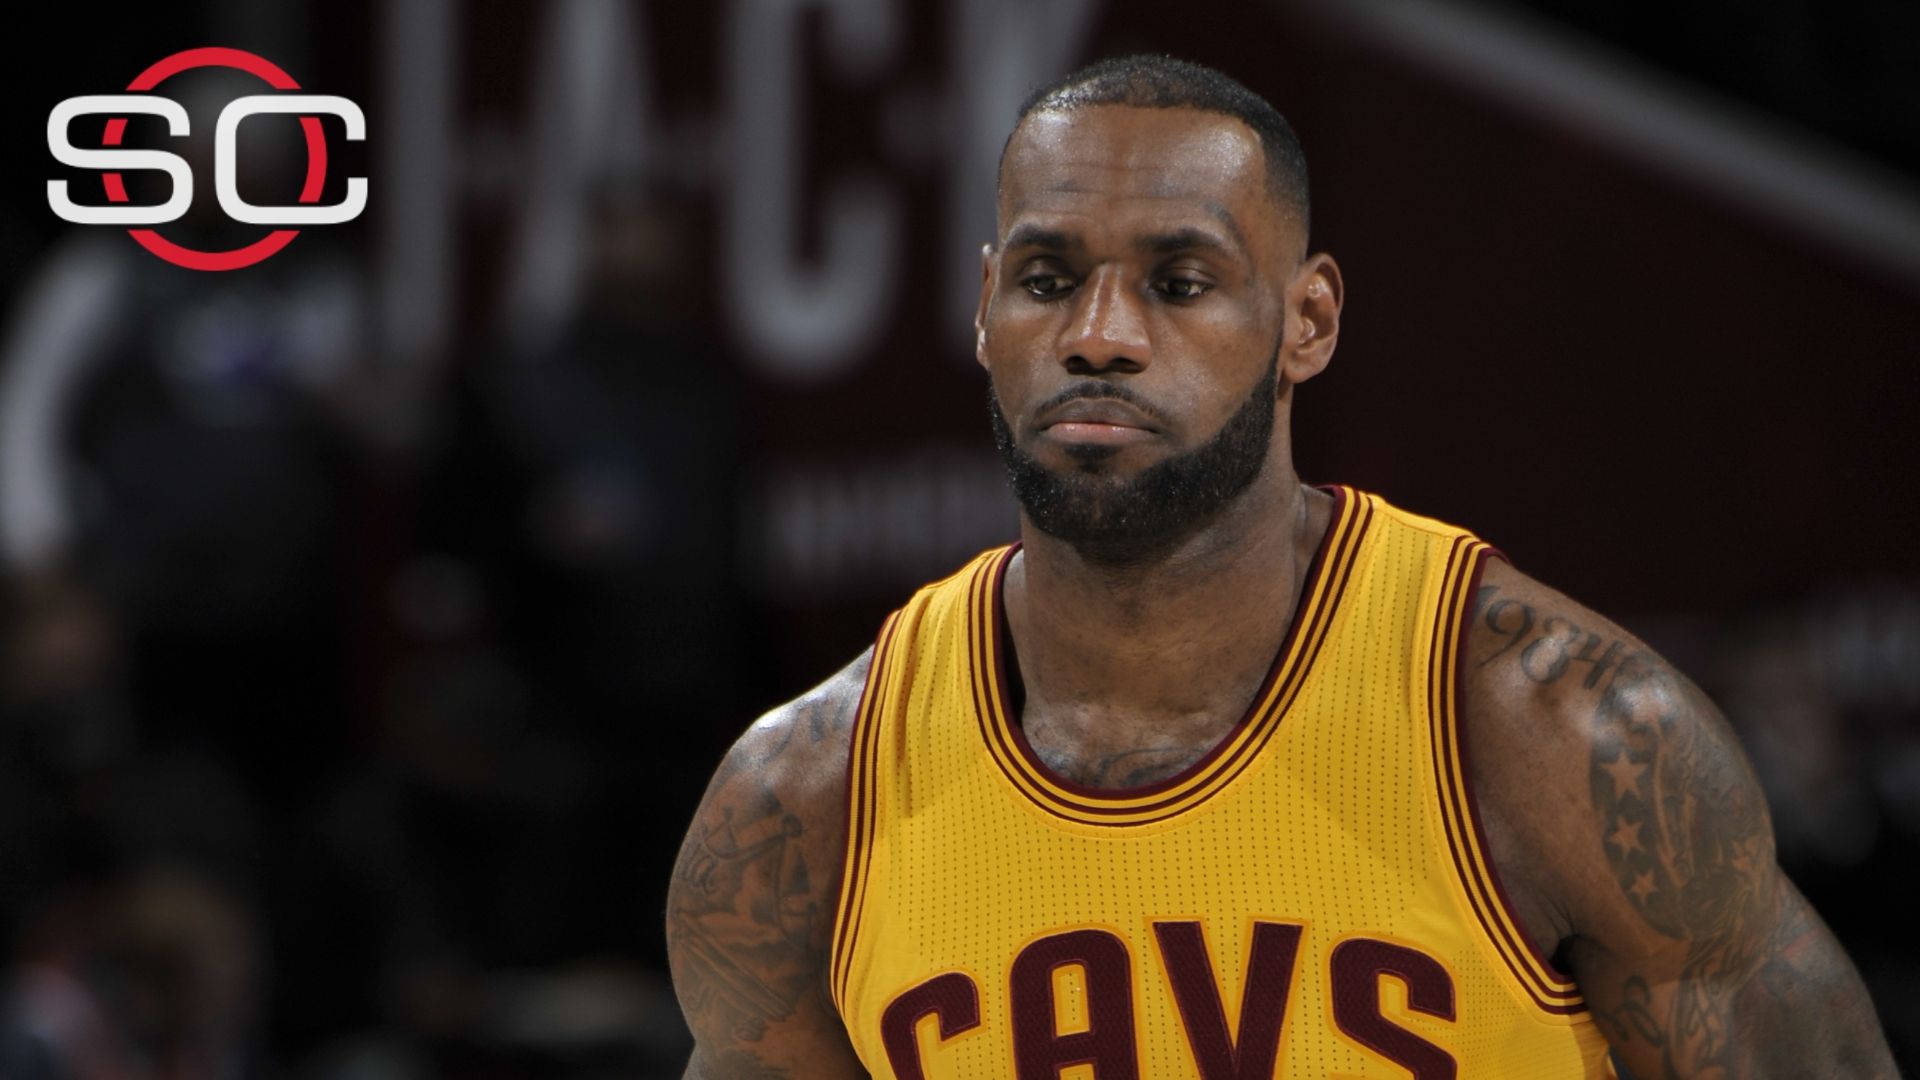 LeBron frustrated over Cavs' lack of spending